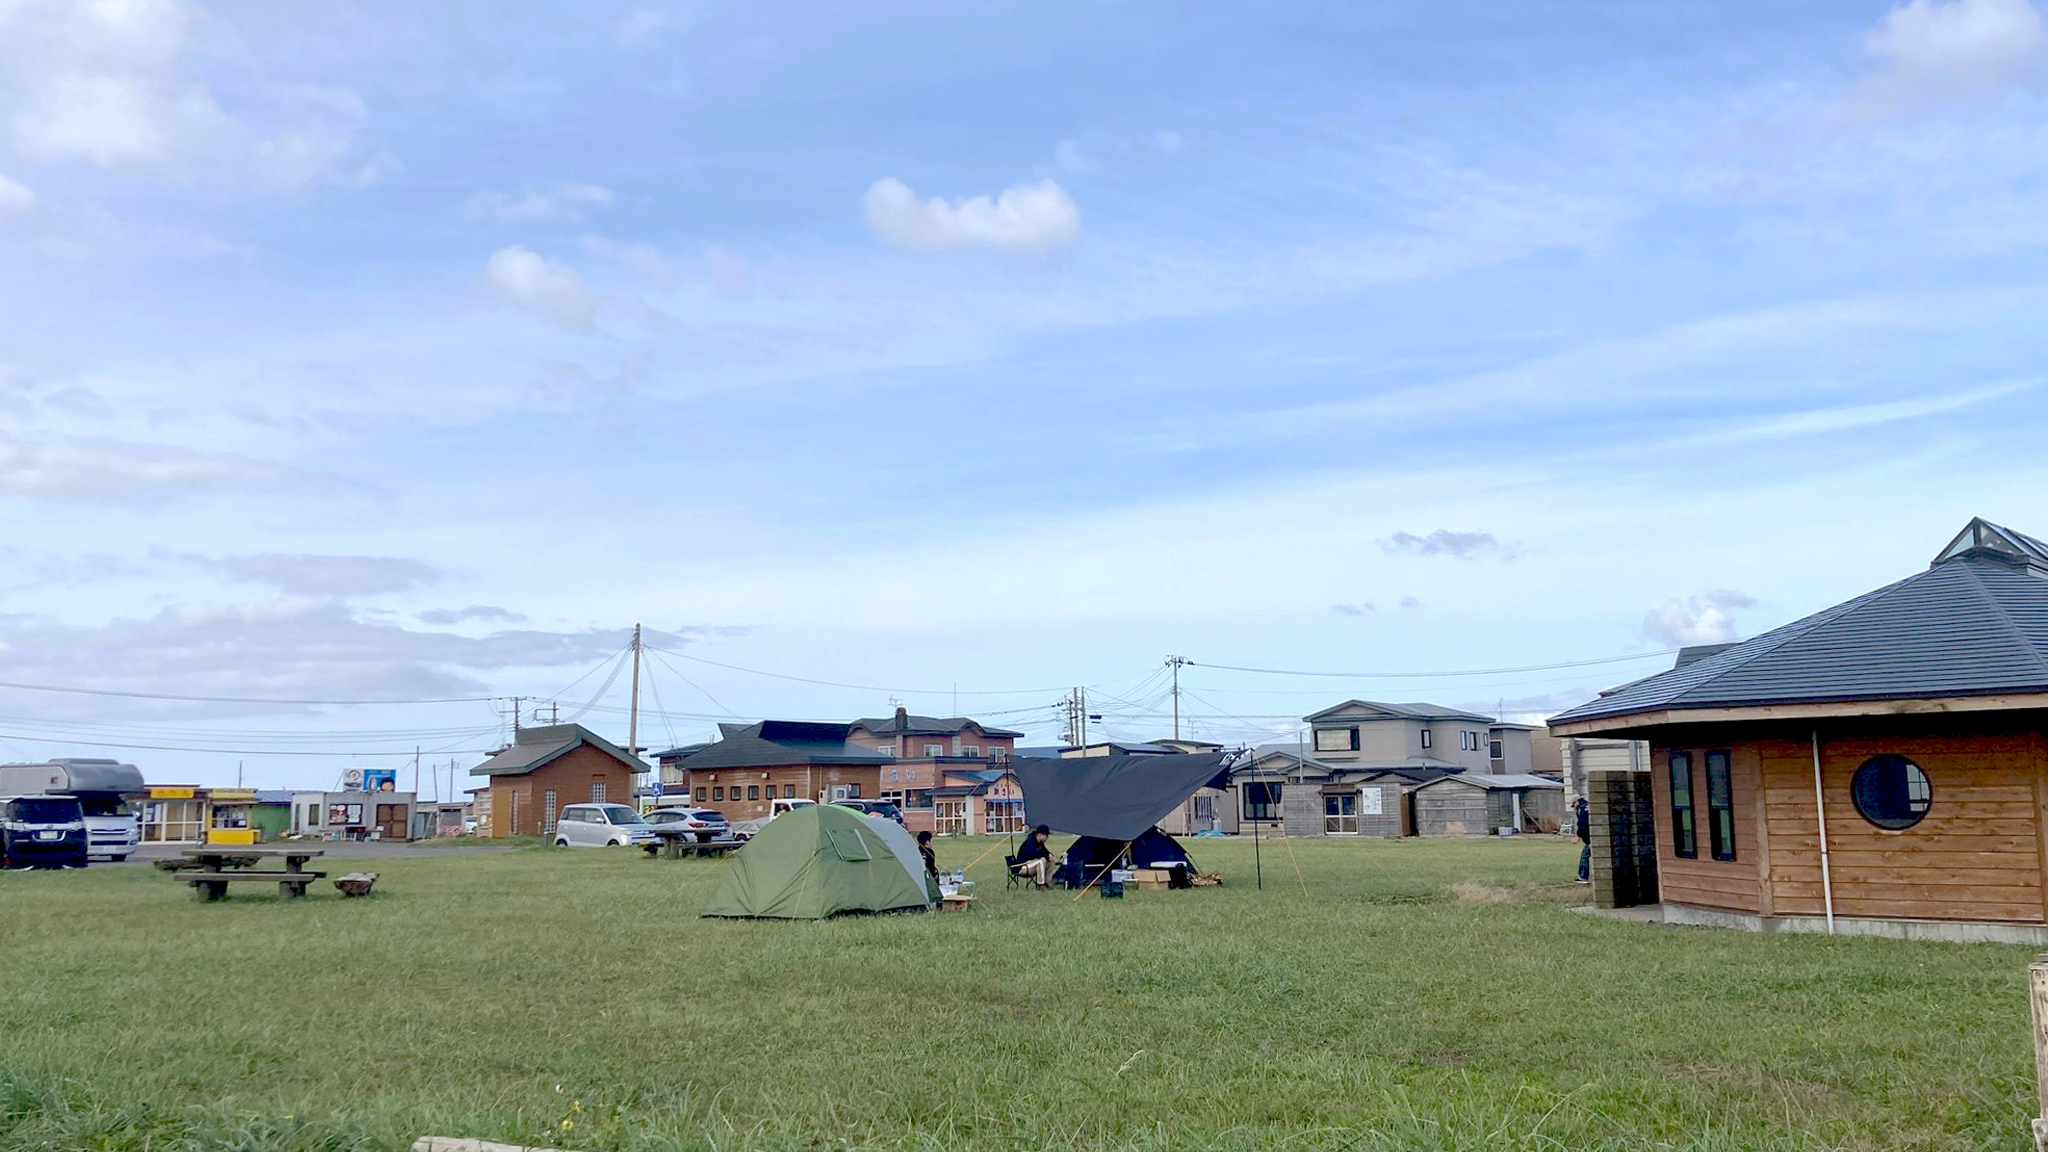 Oma Camp while enjoying the stunning views of the northernmost point of Honshu!